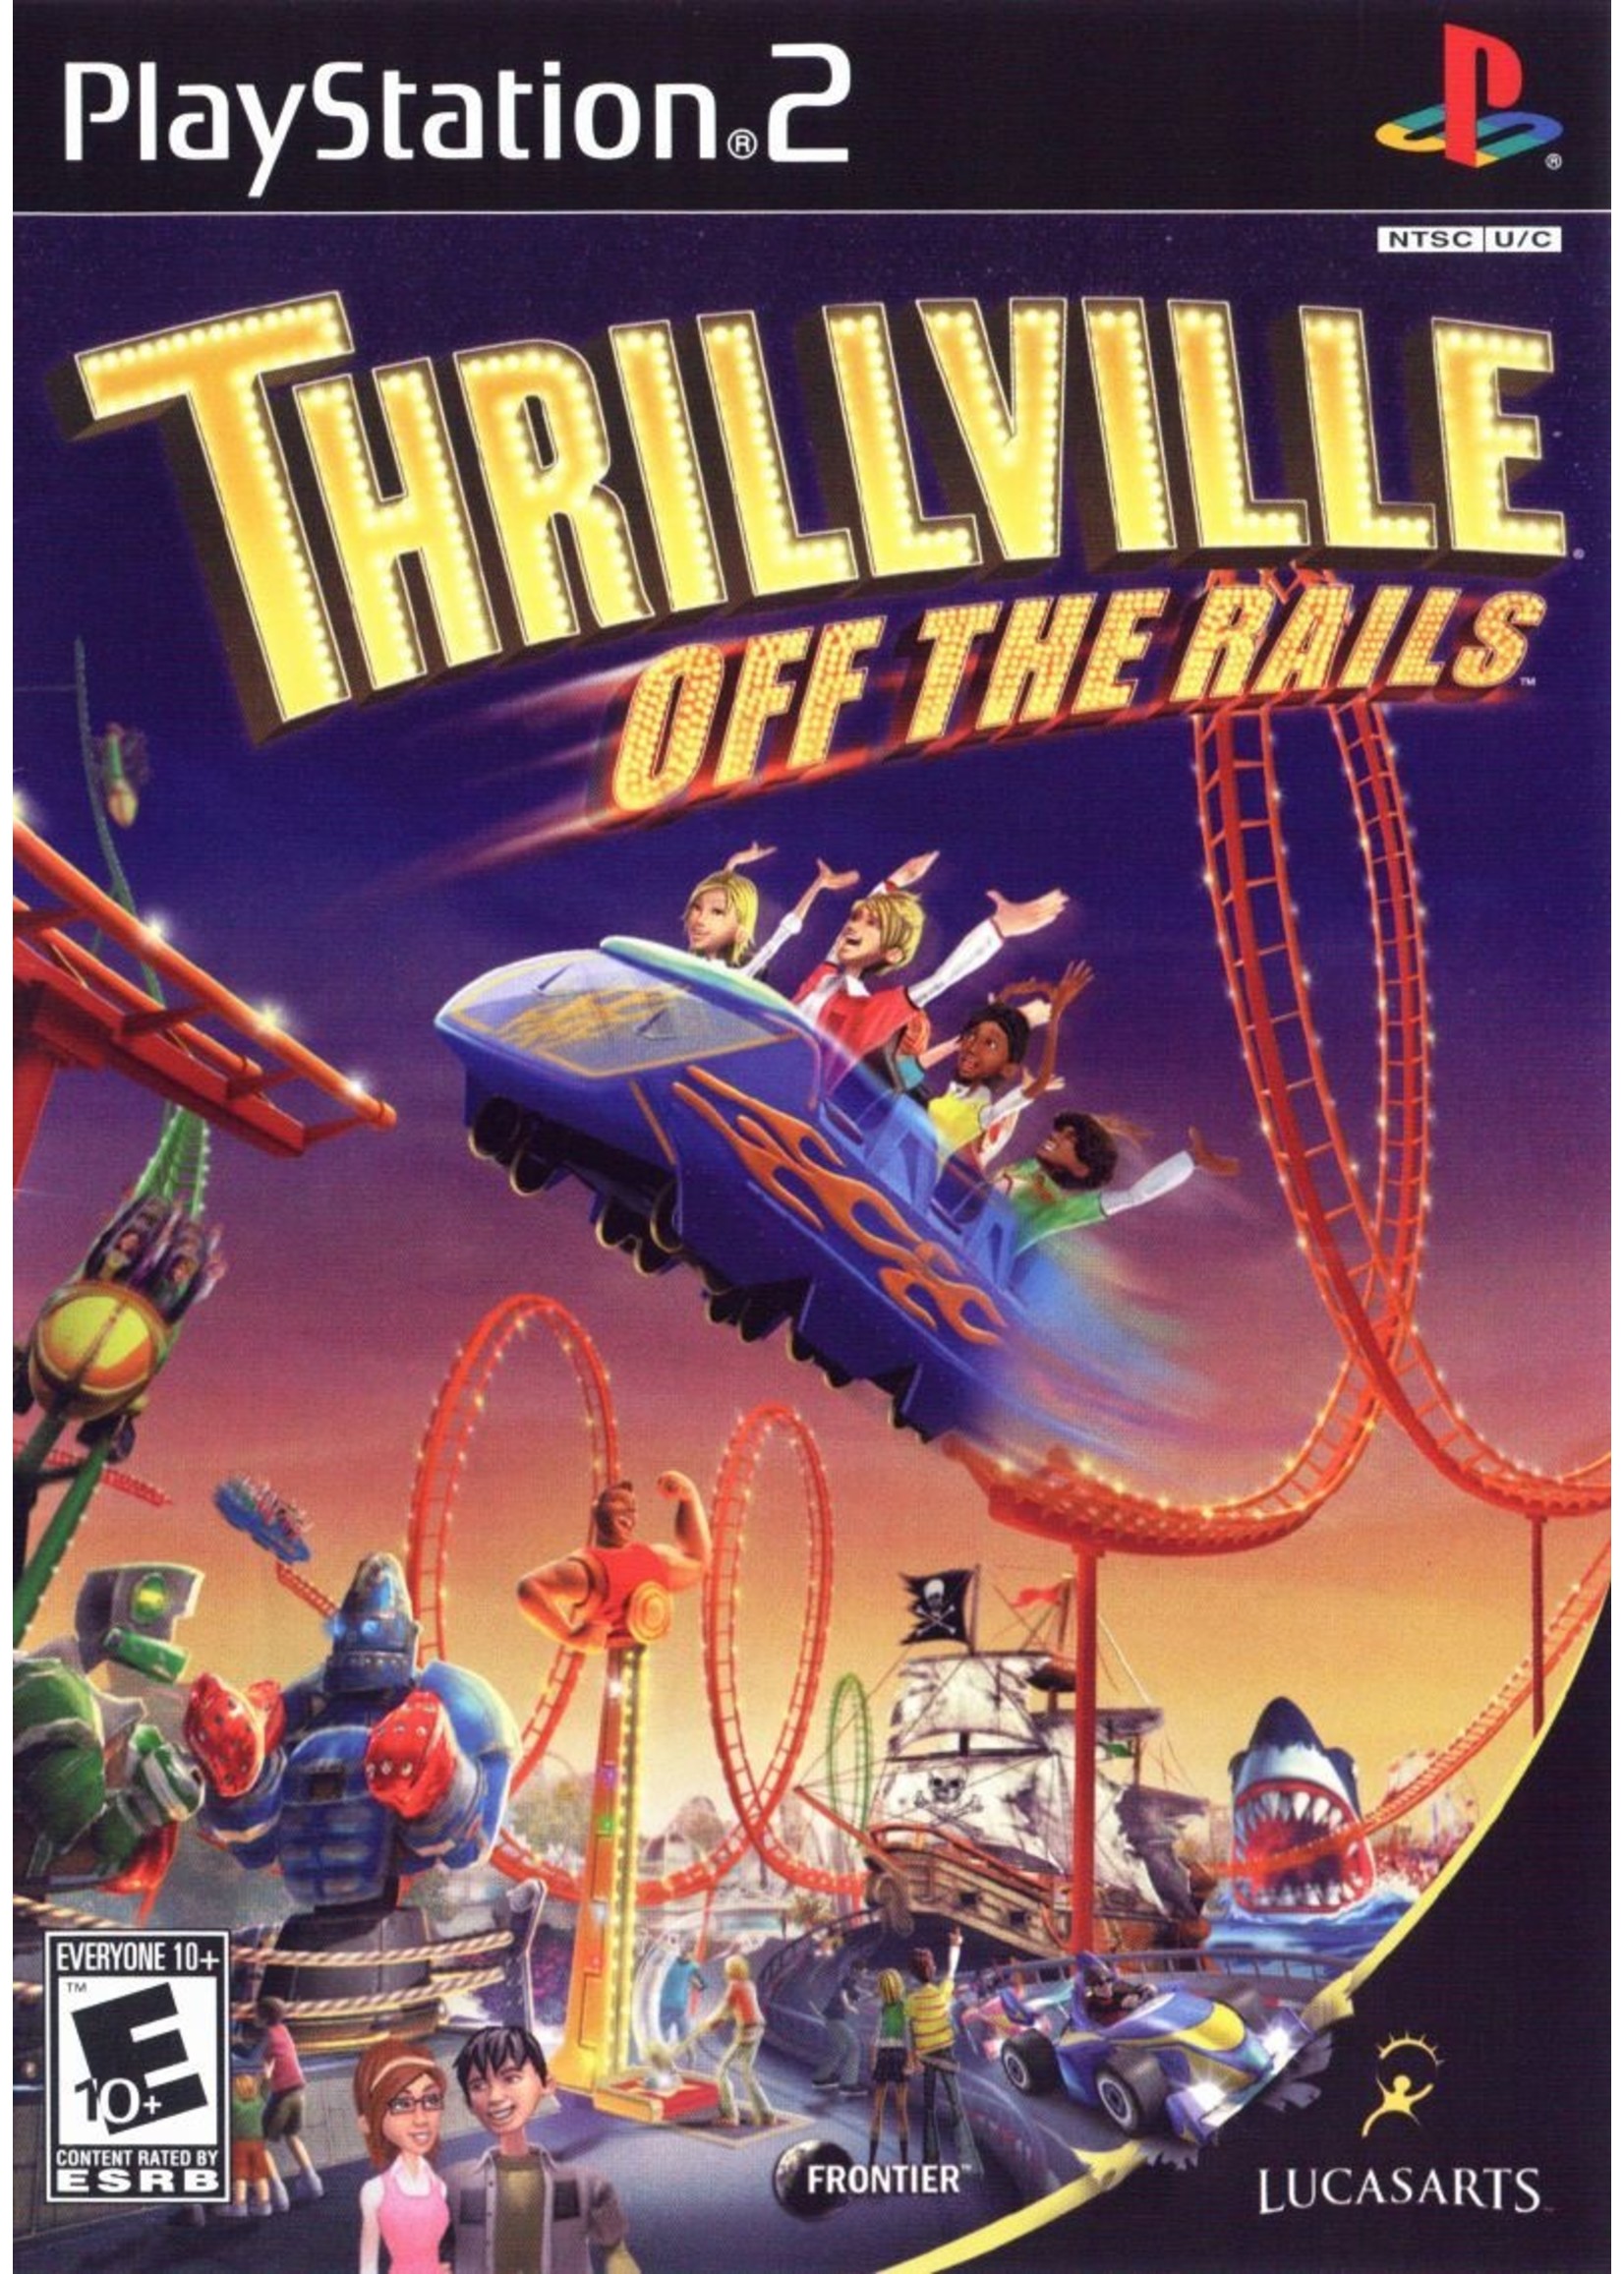 Sony Playstation 2 (PS2) Thrillville Off The Rails